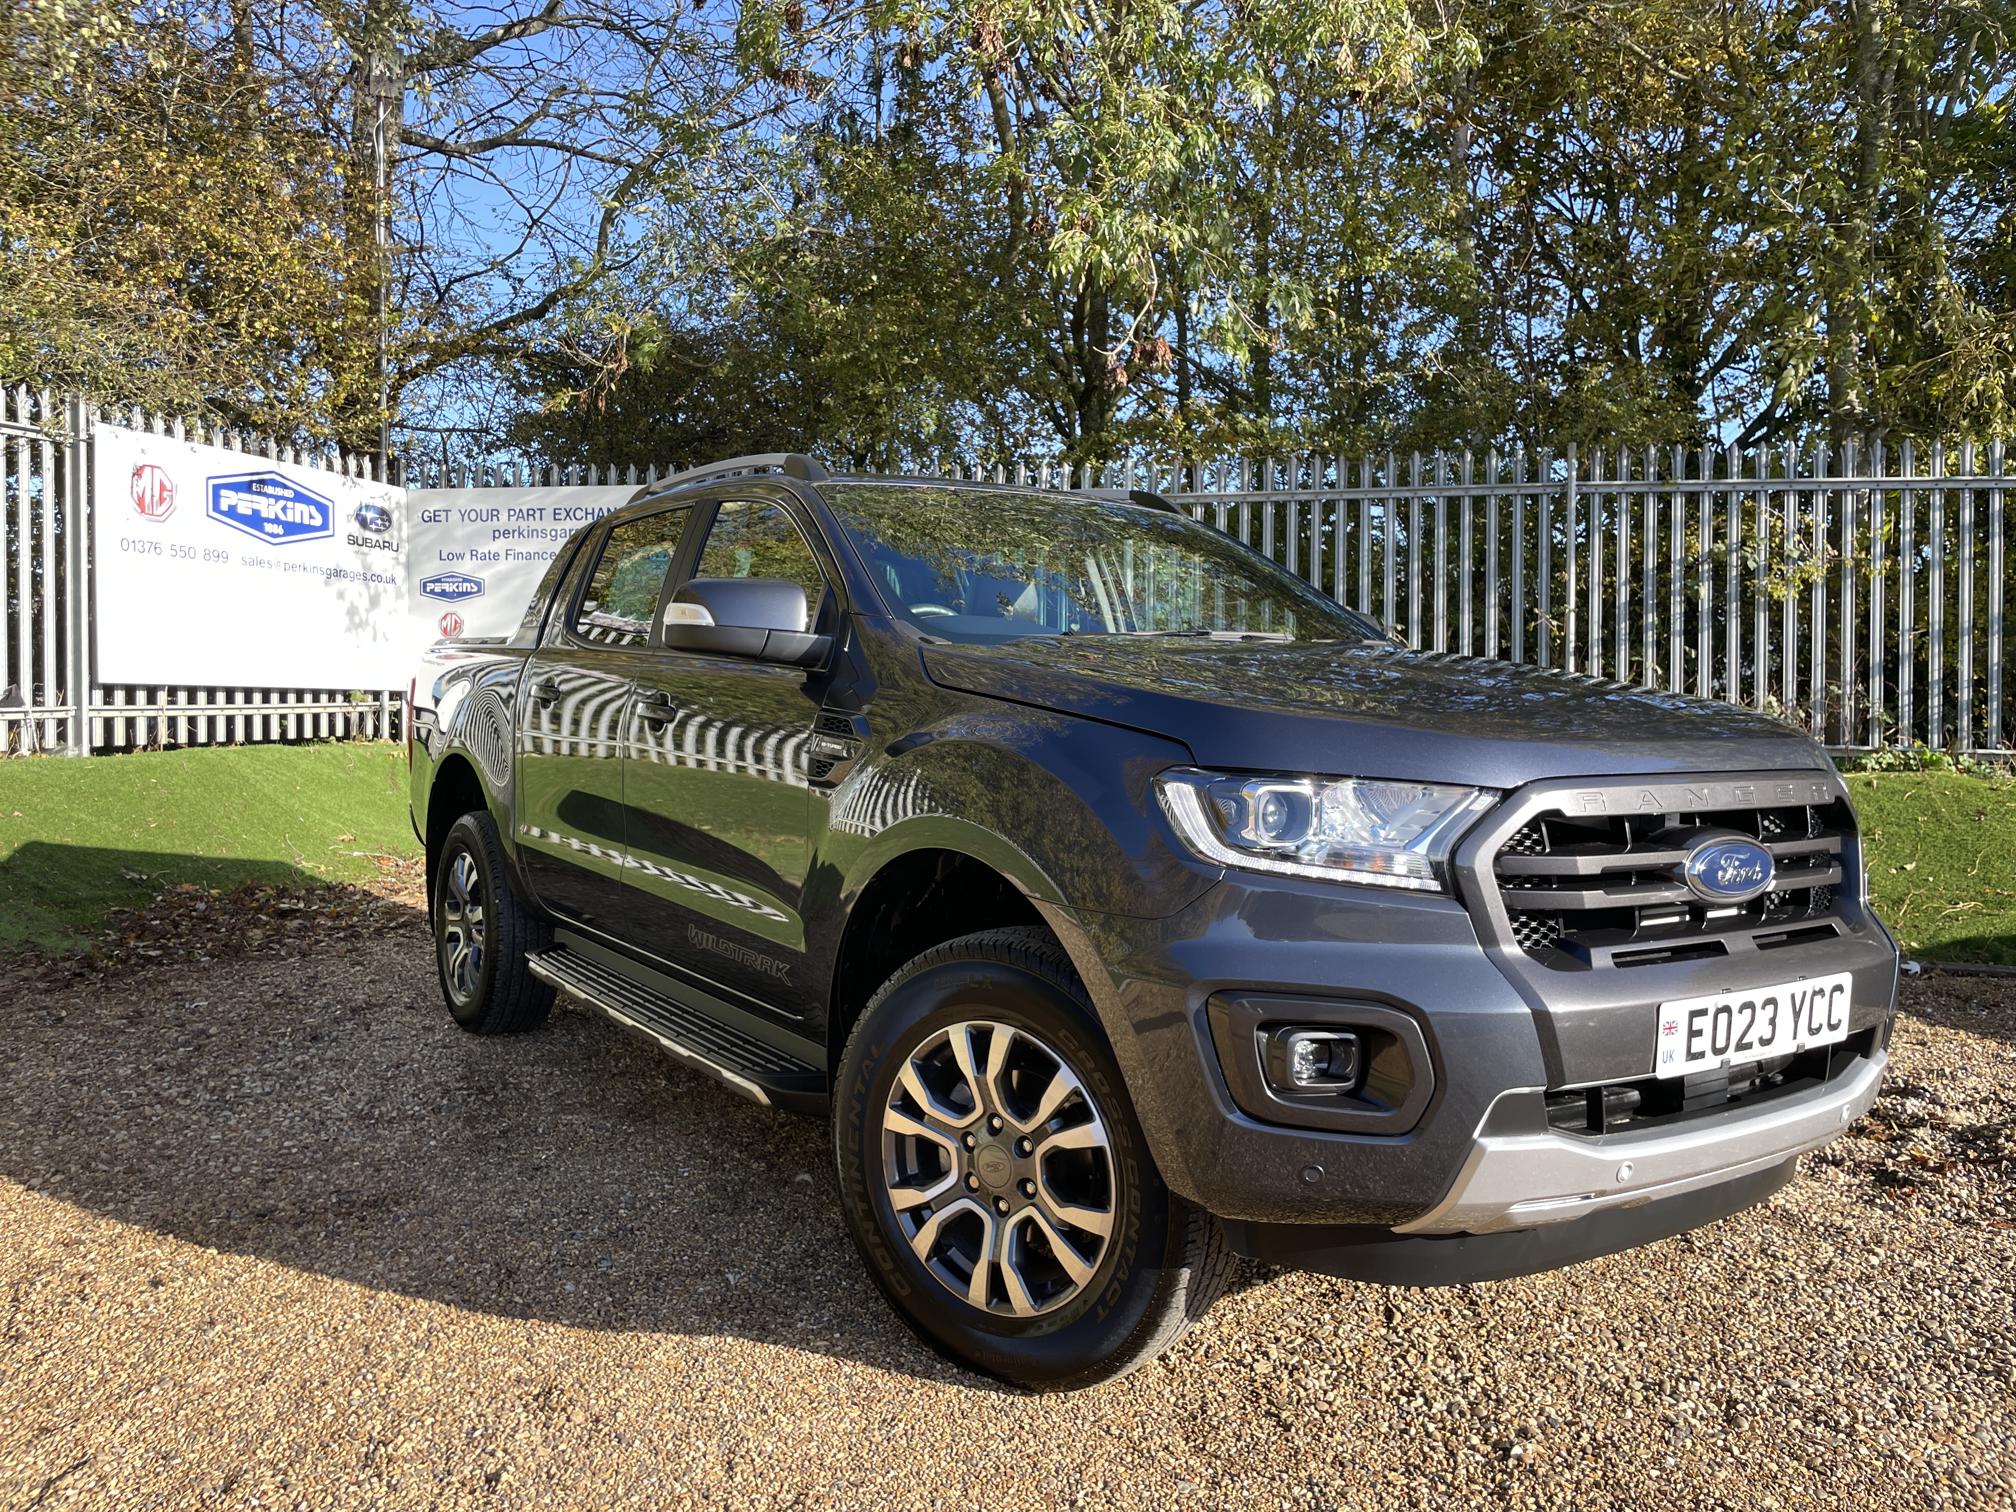 Ford Ranger Wildtrack no vat for sale mountain top